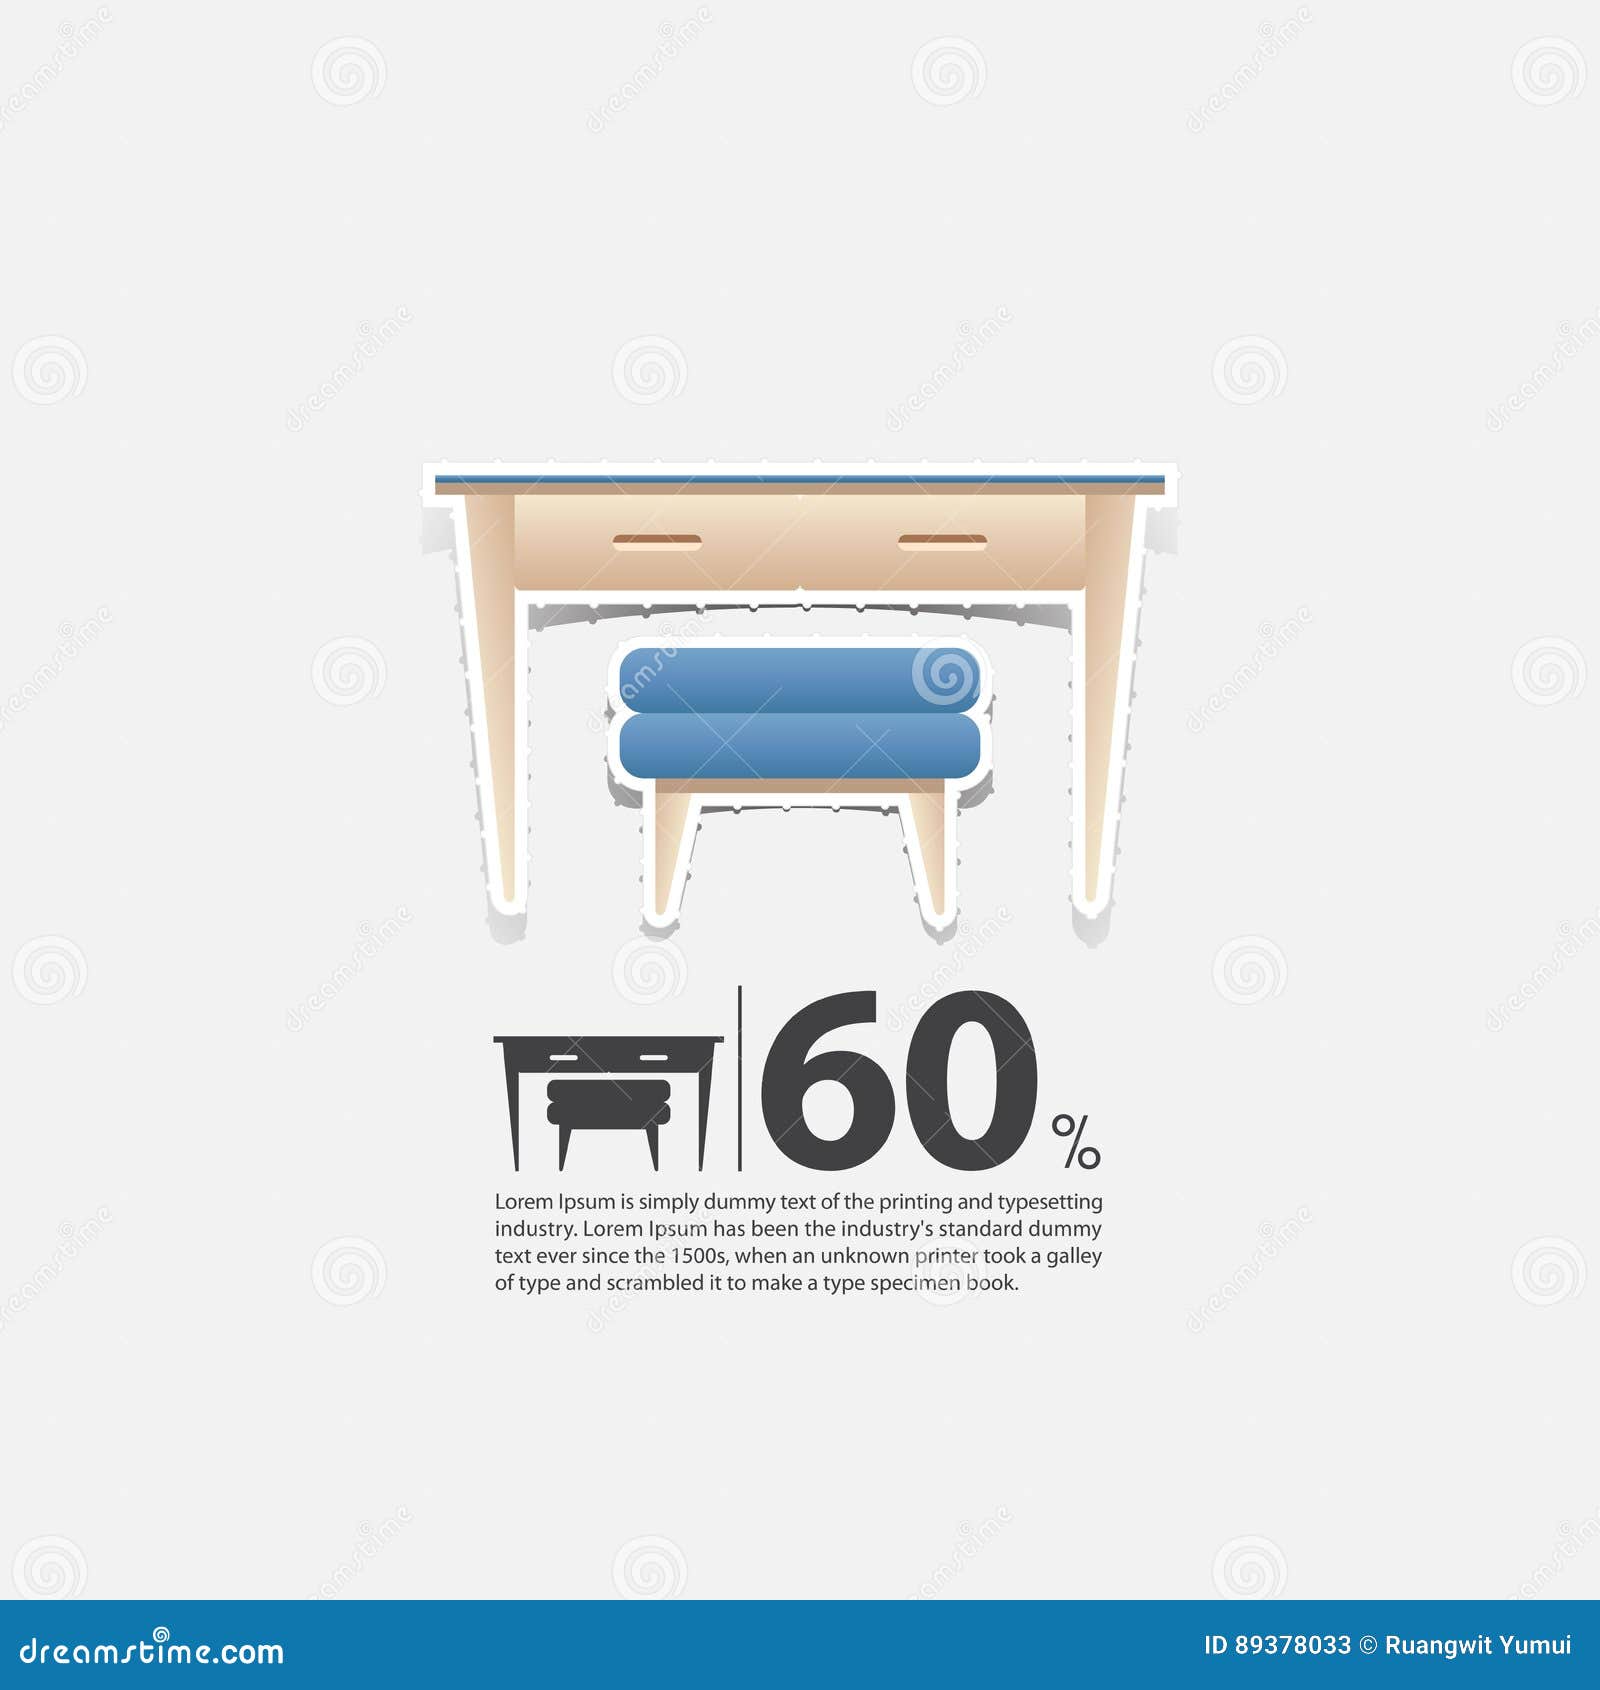 Working Desk And Chair In Flat Design For Office Room Interior